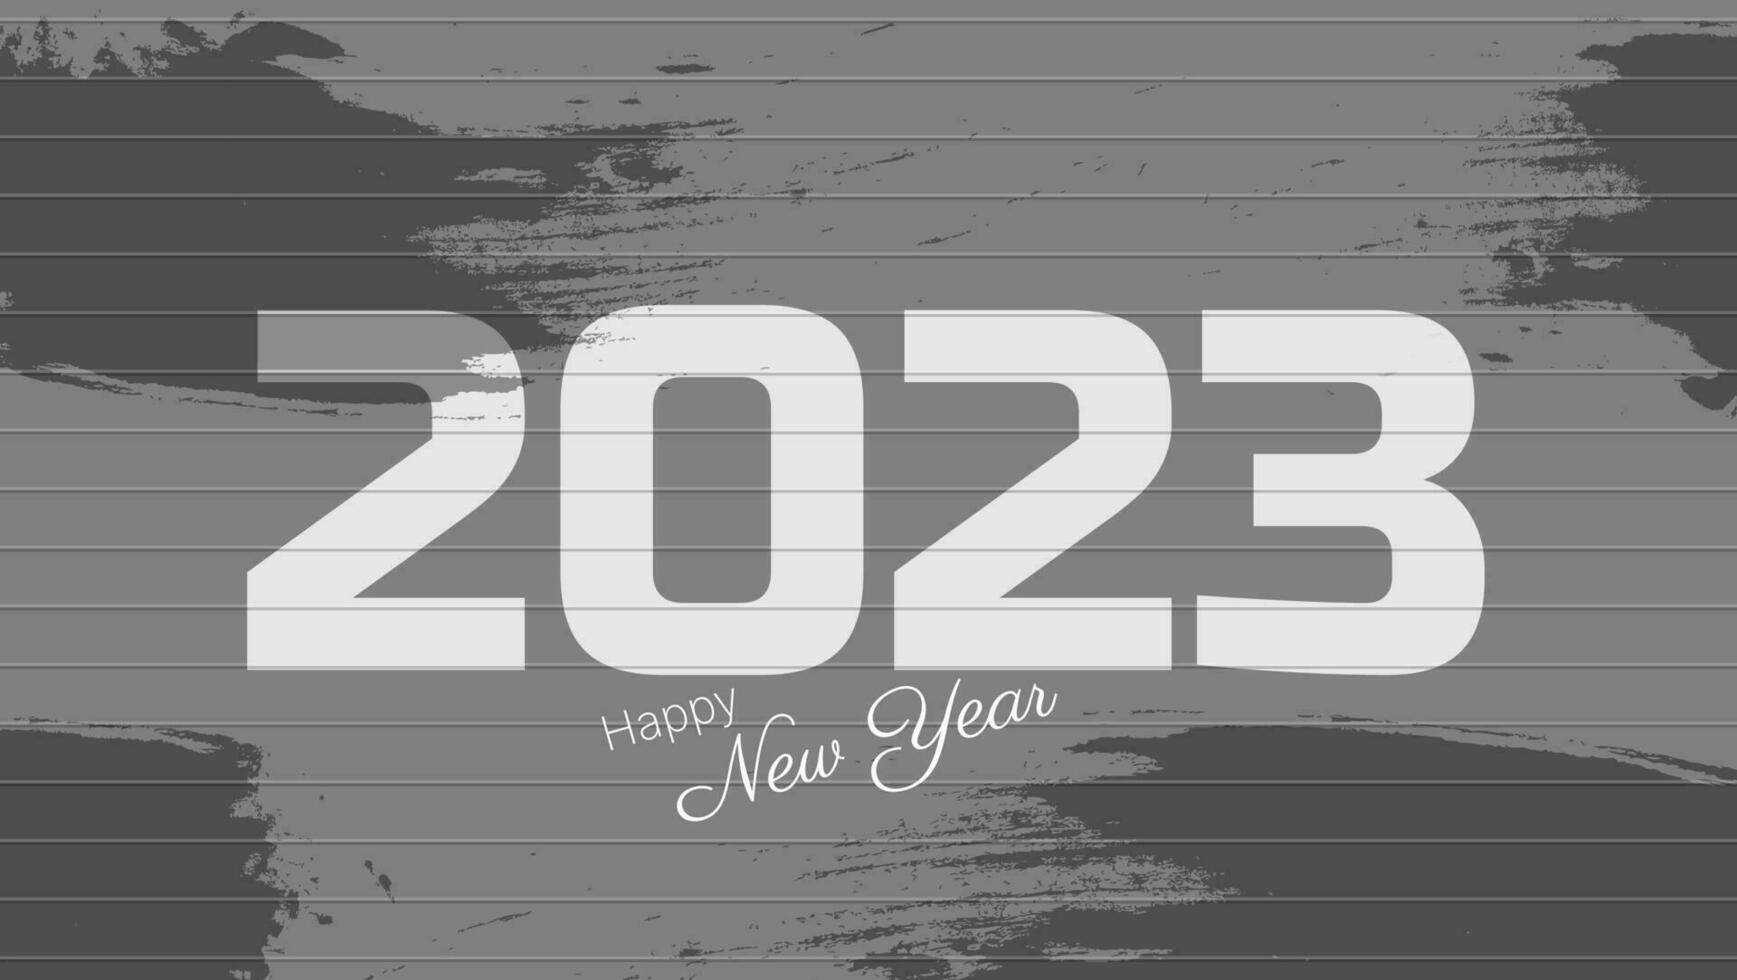 happy new year 2023 background with striped background and grunge. vector illustration